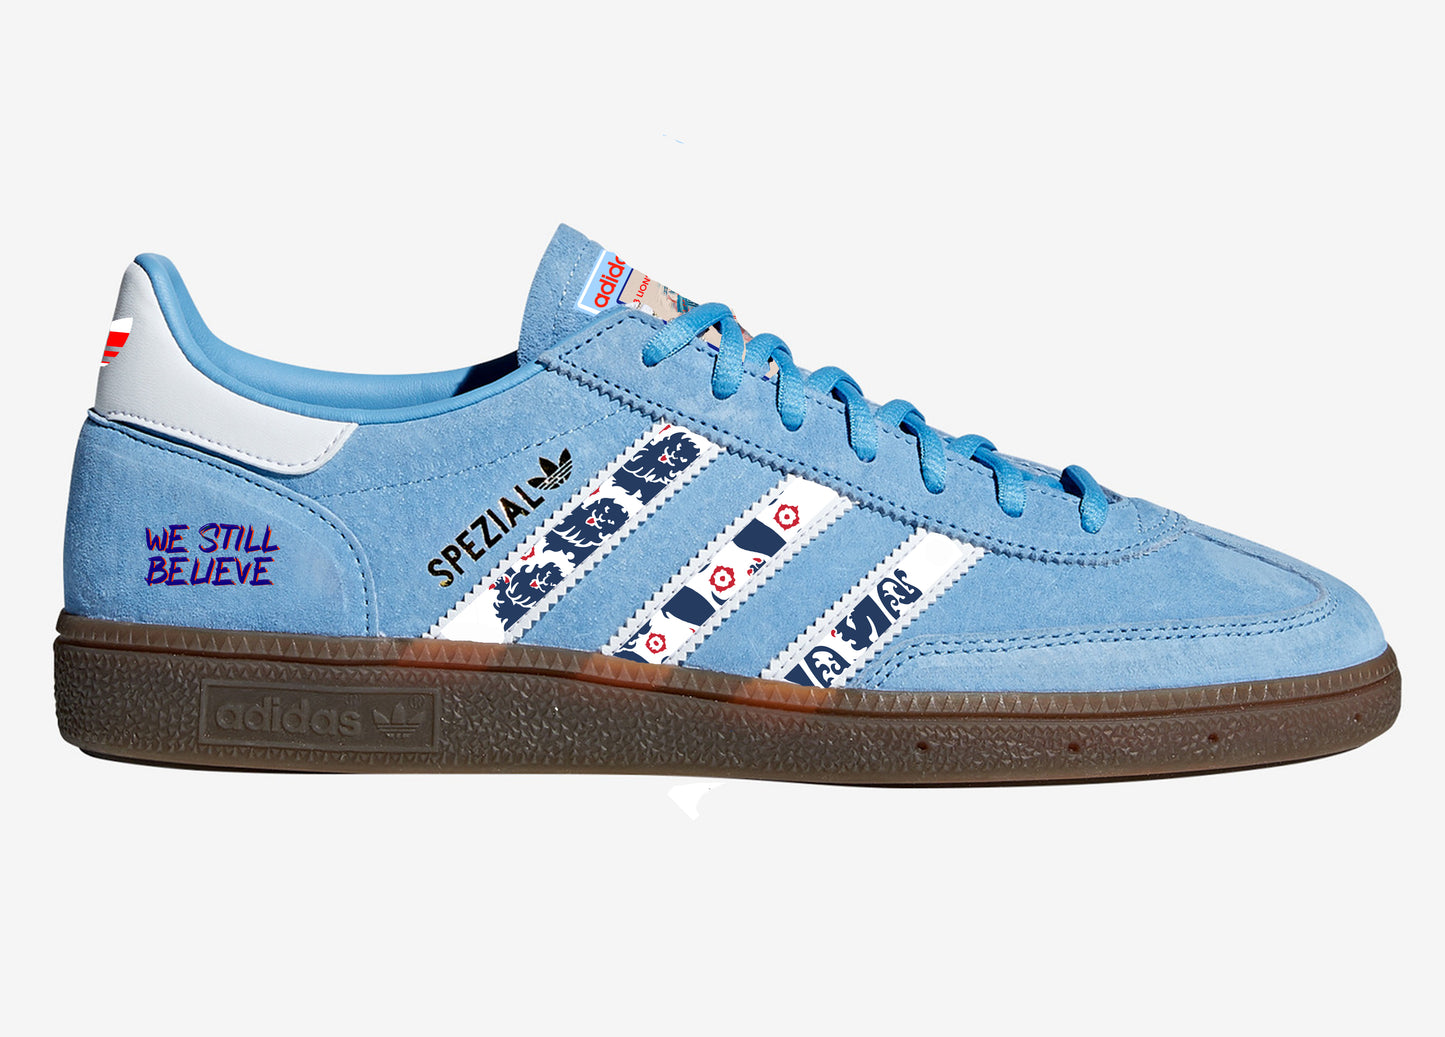 Limited edition Adidas England 3 lions light blue spezial trainers / sneakers